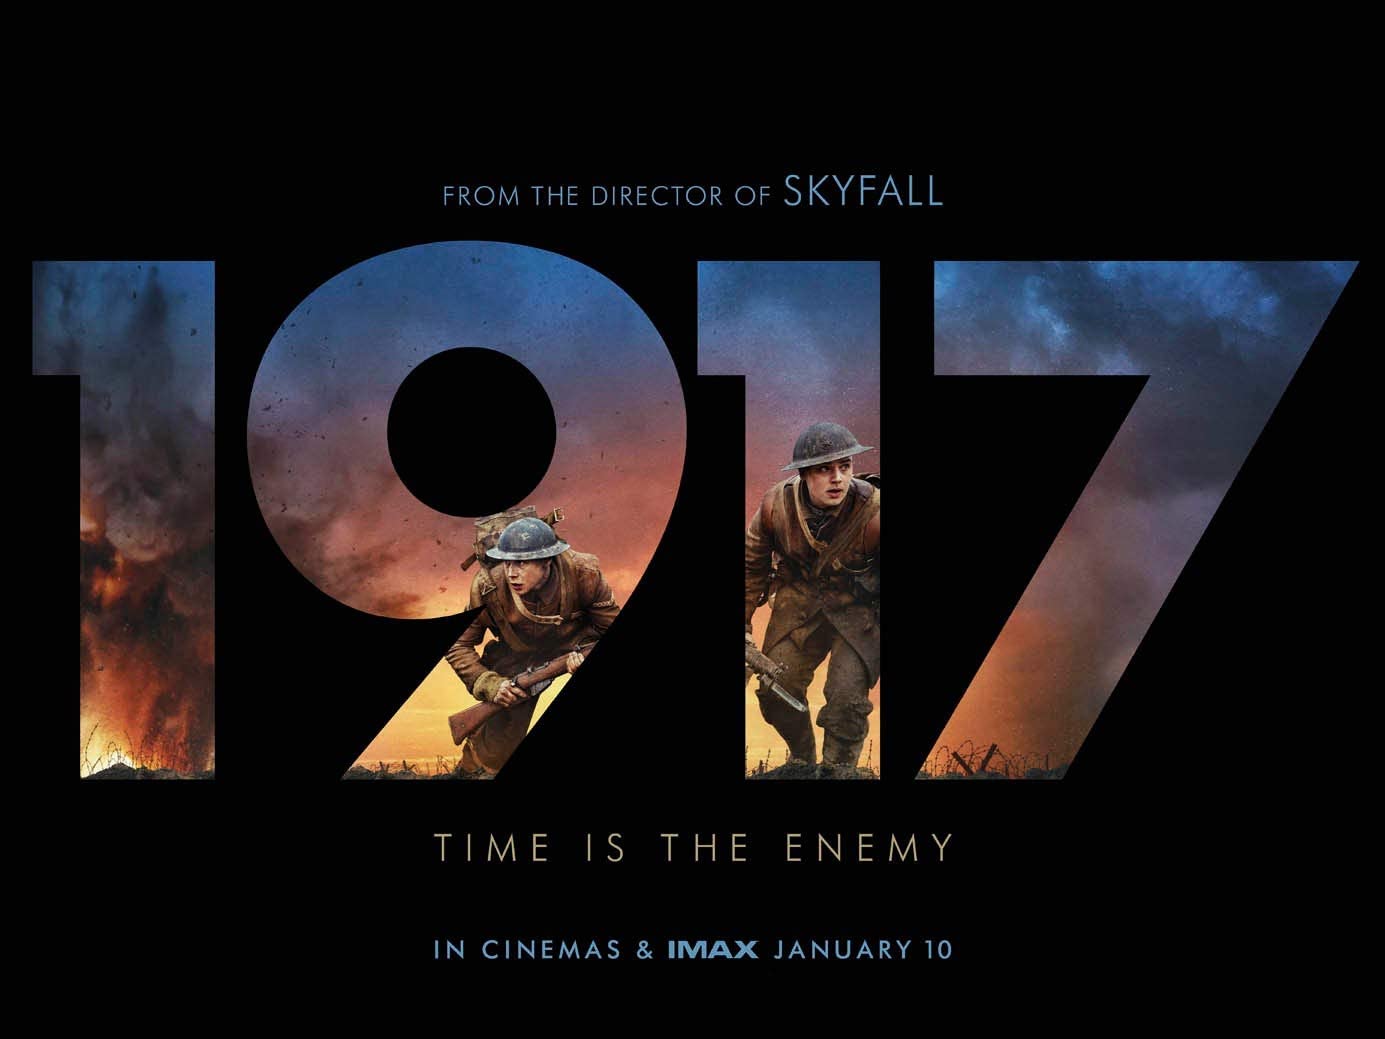 1917 – a war movie focused more on the heart than the violence